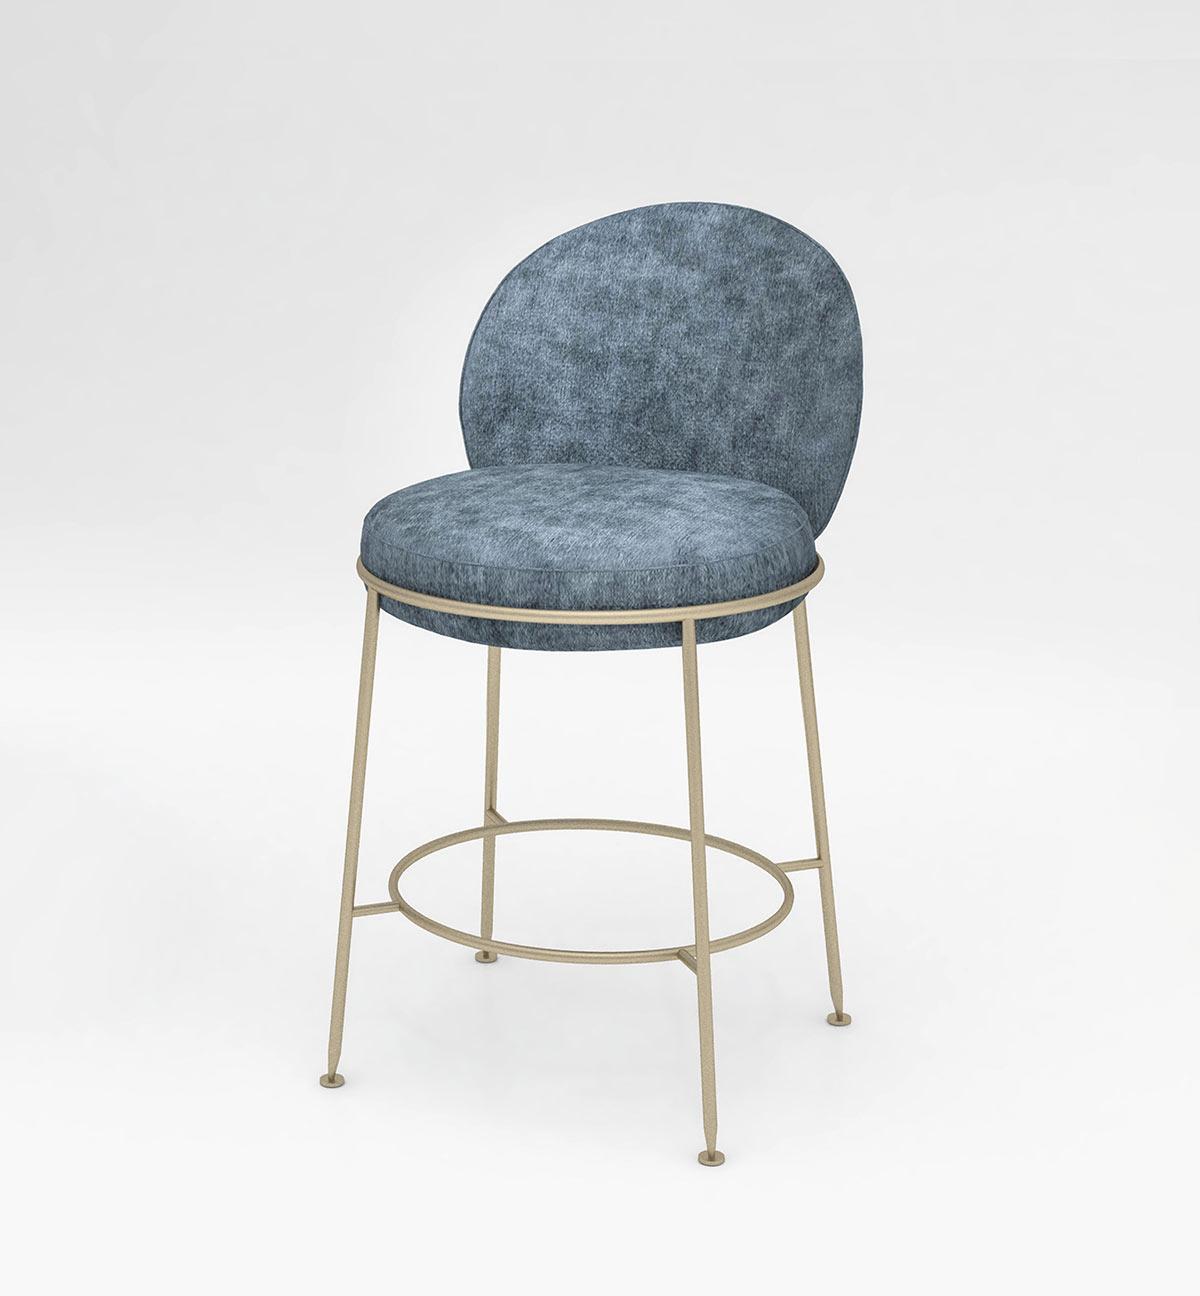 Italian Beatiful Barstool Amaretto Collection Available in Different Colors For Sale